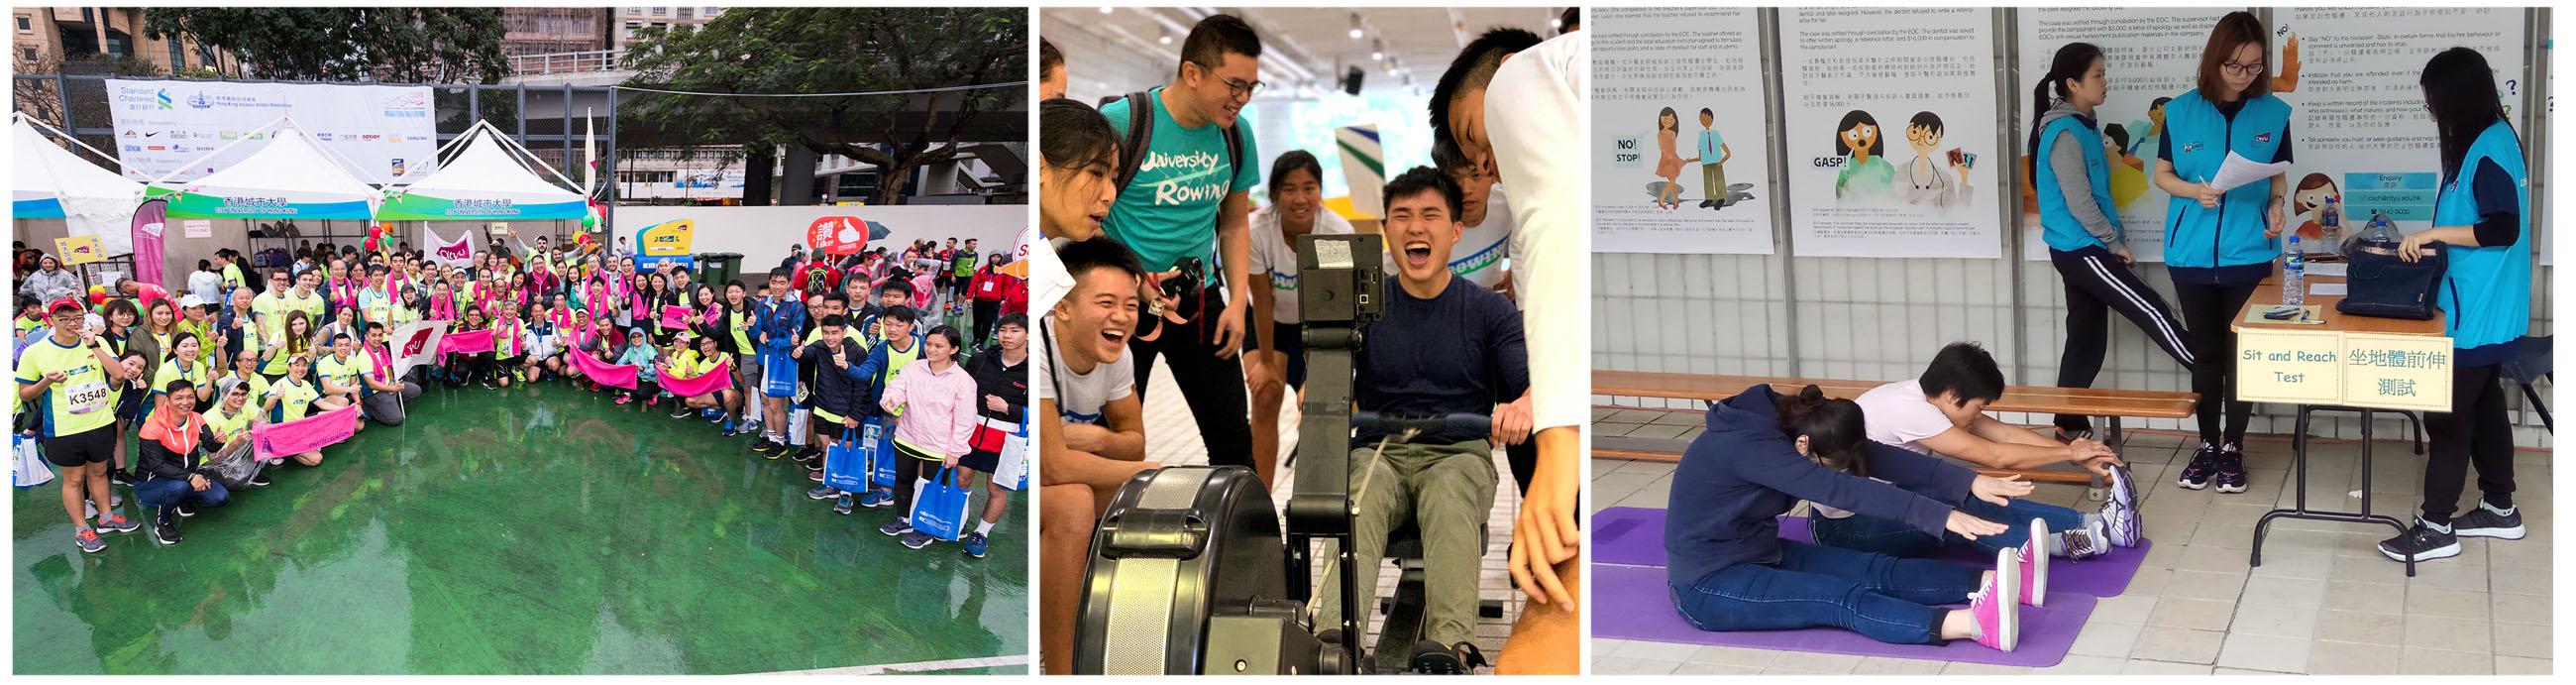 Activities for the “CityU Wellness for All" campaign: (from left) CityU delegates participating in SCHK Marathon; Rowling Touch; health and fitness assessment.